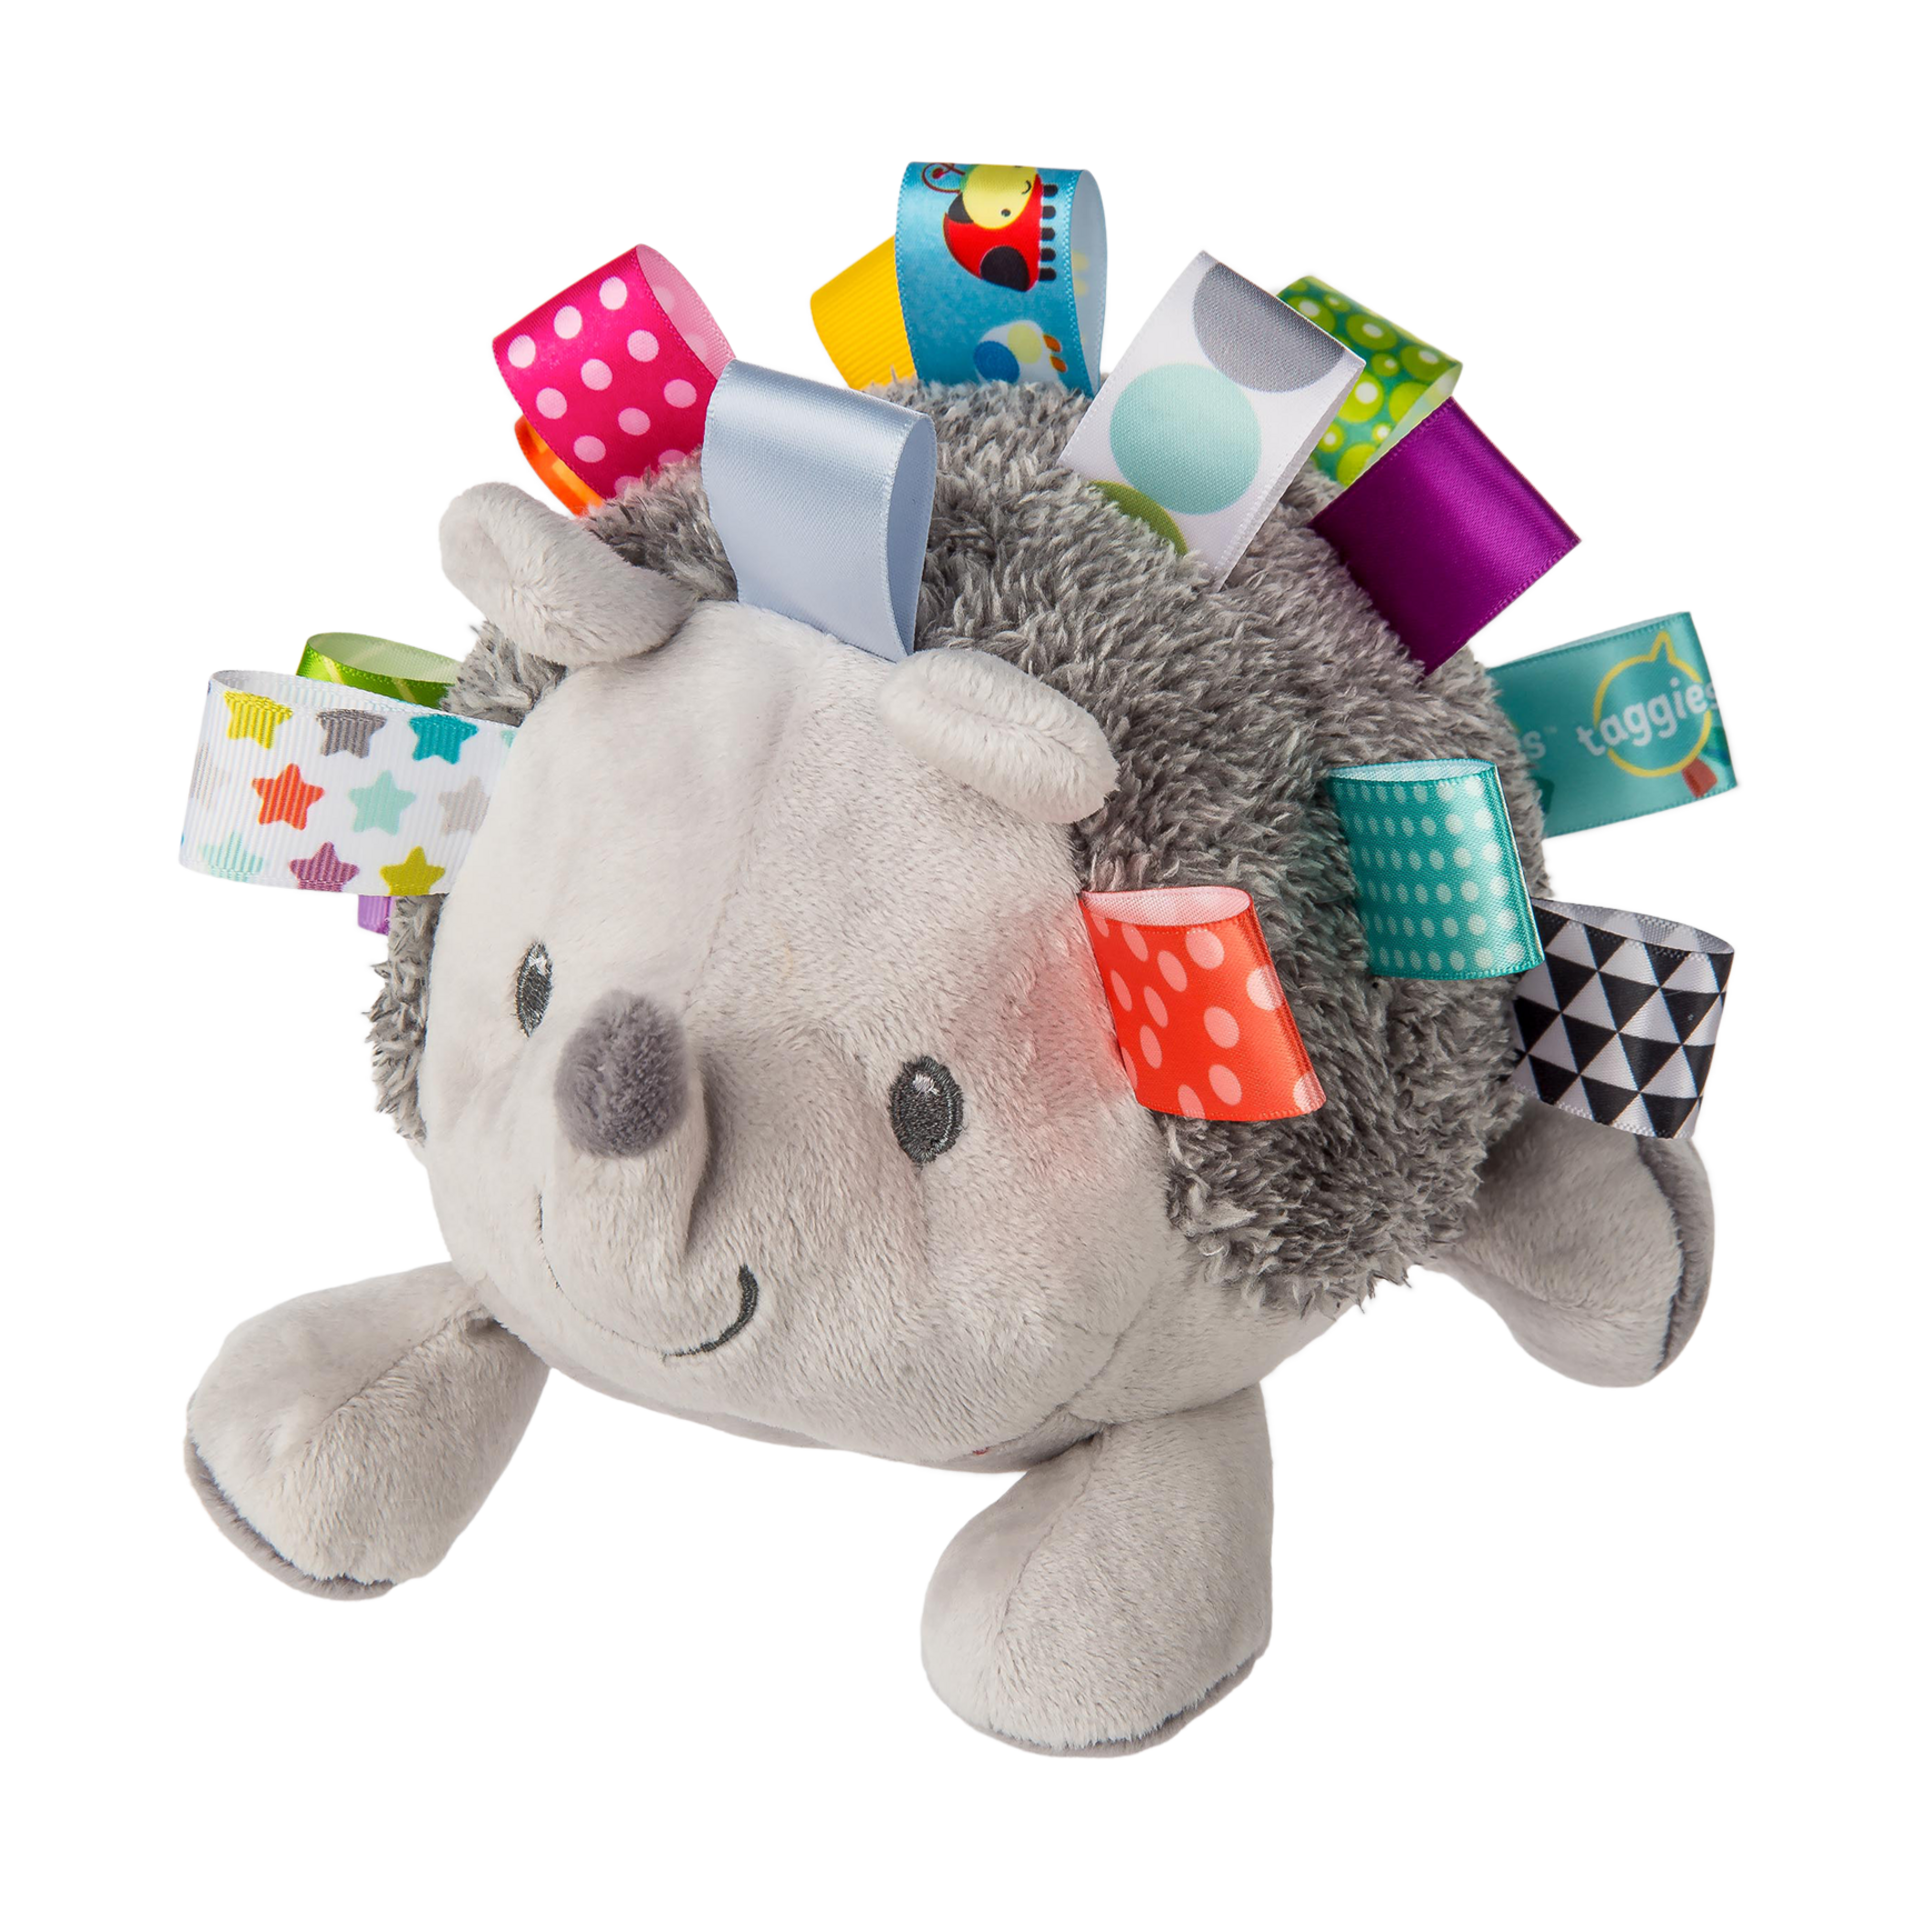 Mary Meyer Taggies Interactive Soft Toy Stuffed Animal with Tags 